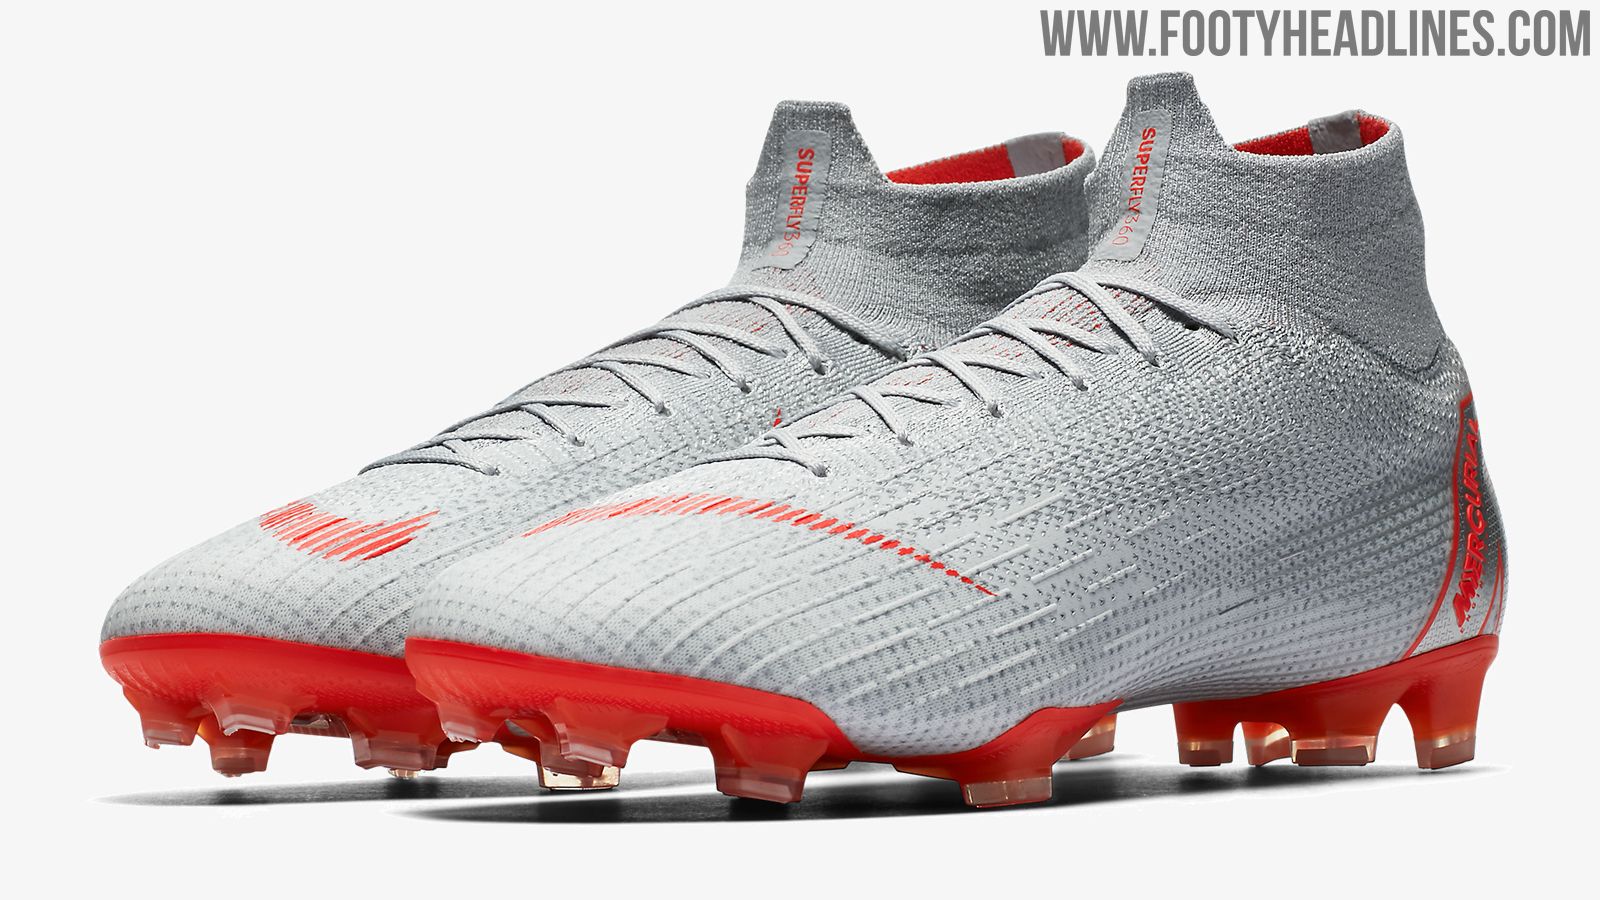 Silver Mercurial Superfly 'Raised on Concrete' 2018-2019 Boots Released Headlines